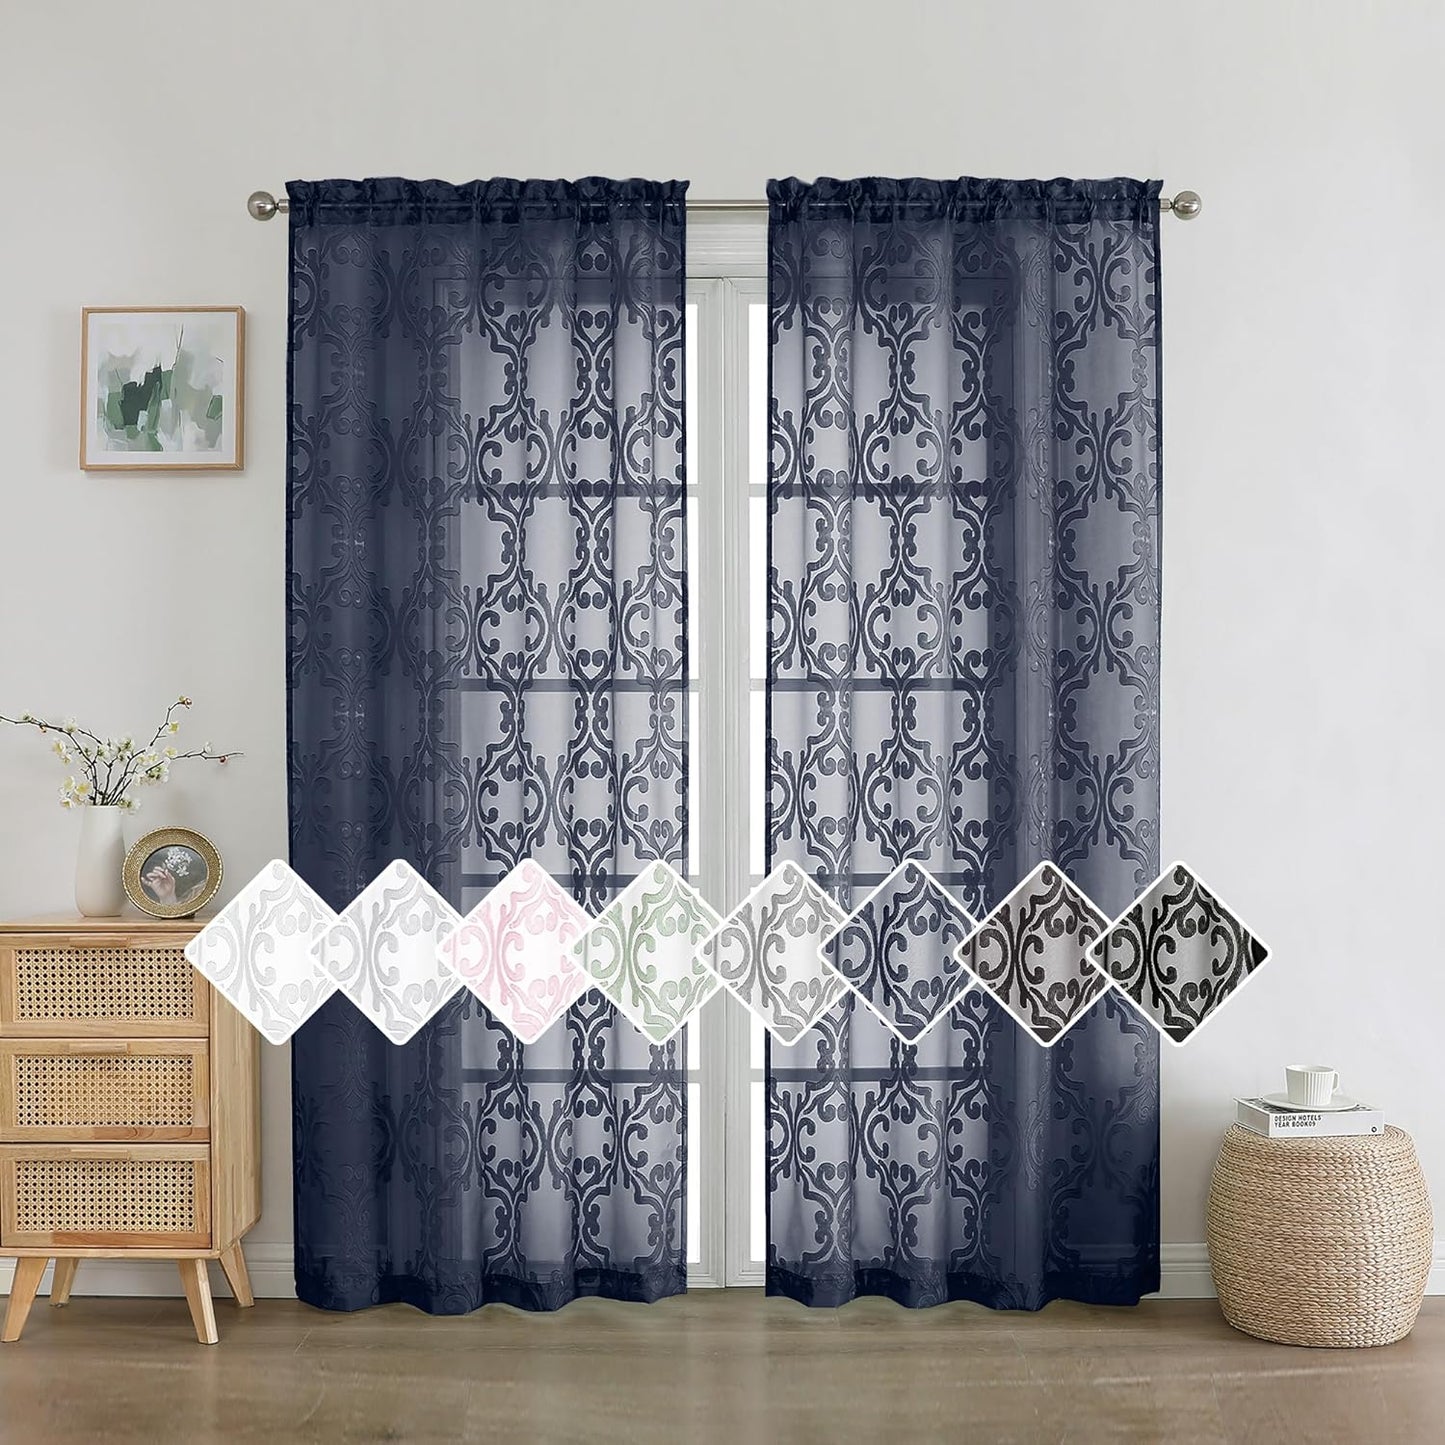 Aiyufeng Suri 2 Panels Sheer Sage Green Curtains 63 Inches Long, Light & Airy Privacy Textured Sheer Drapes, Dual Rod Pocket Voile Clipped Floral Luxury Panels for Bedroom Living Room, 42 X 63 Inch  Aiyufeng Navy Blue 2X42X72" 